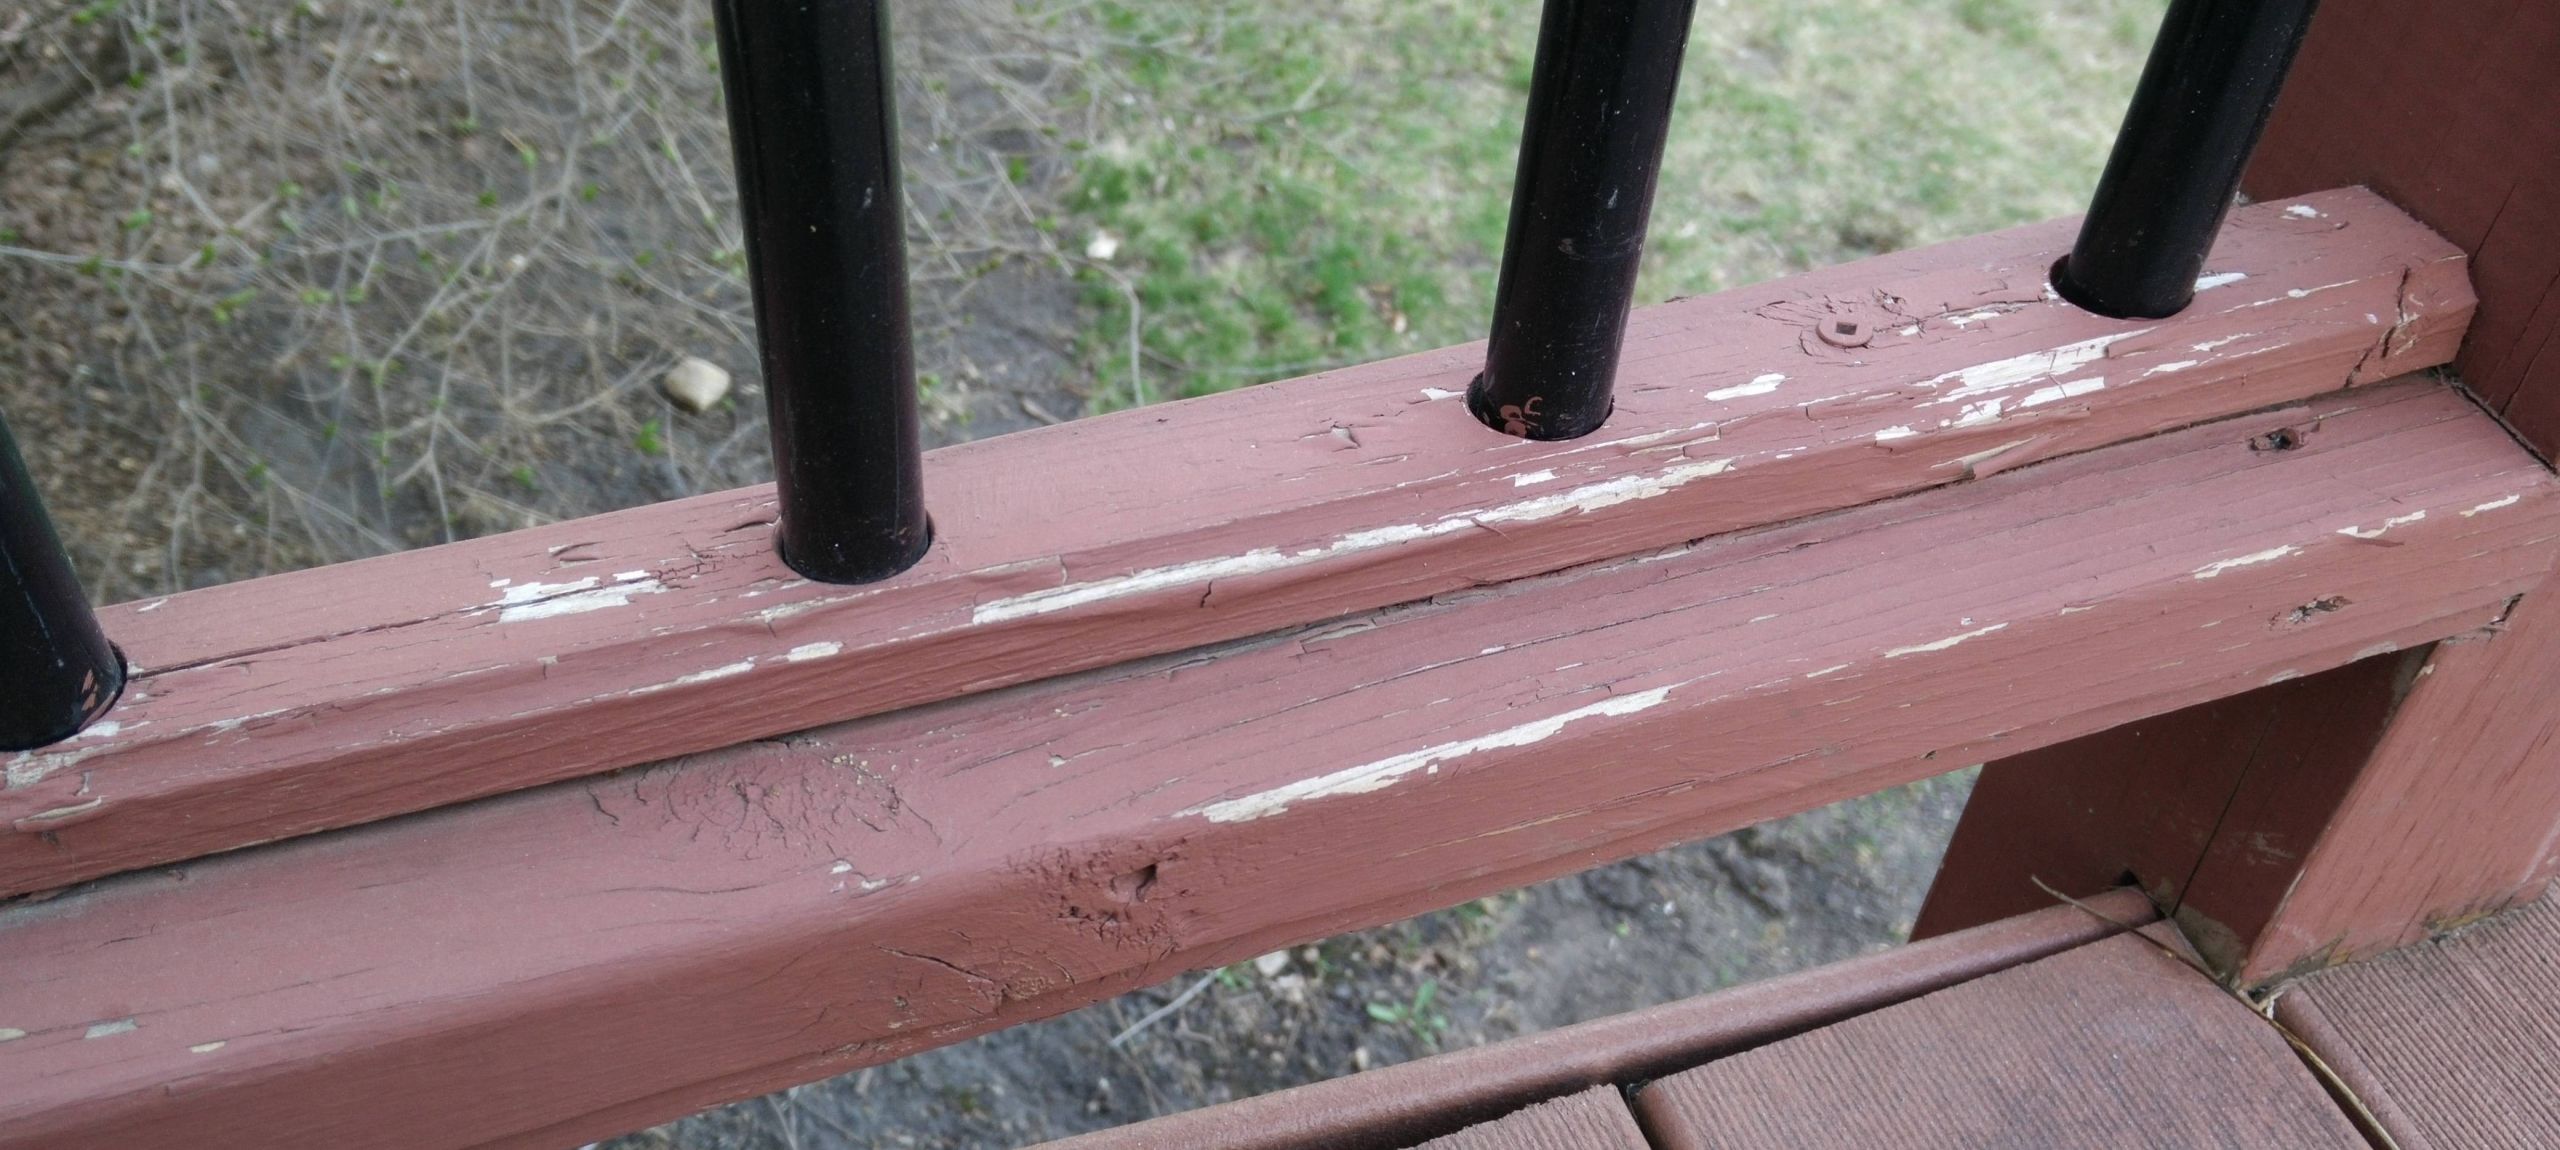 Painting Deck Railing
 How to fix flaking paint on a deck railing and make it